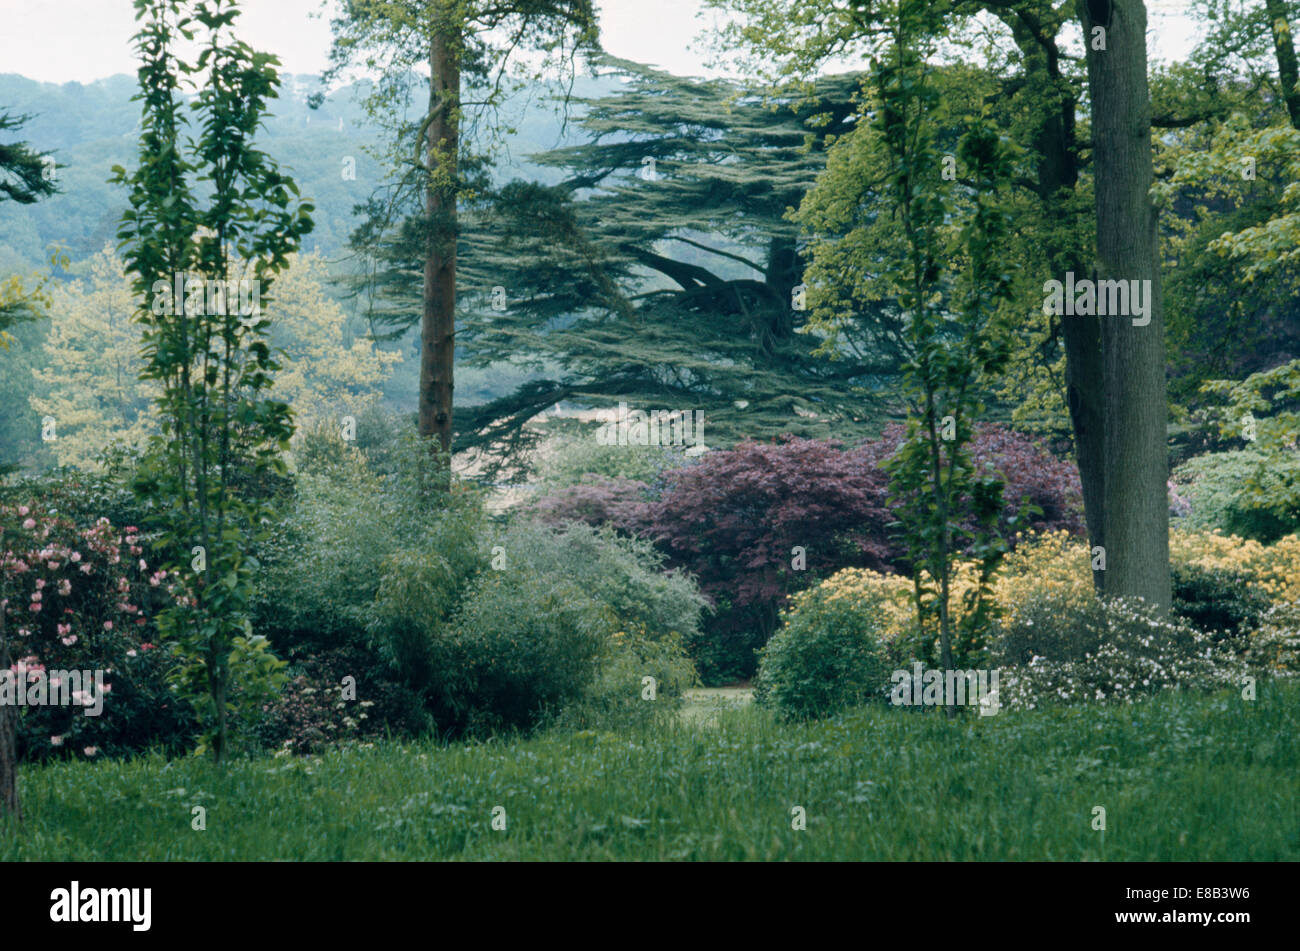 Rhododendron and Cedar of Lebanon in large hillside woodland garden Stock Photo